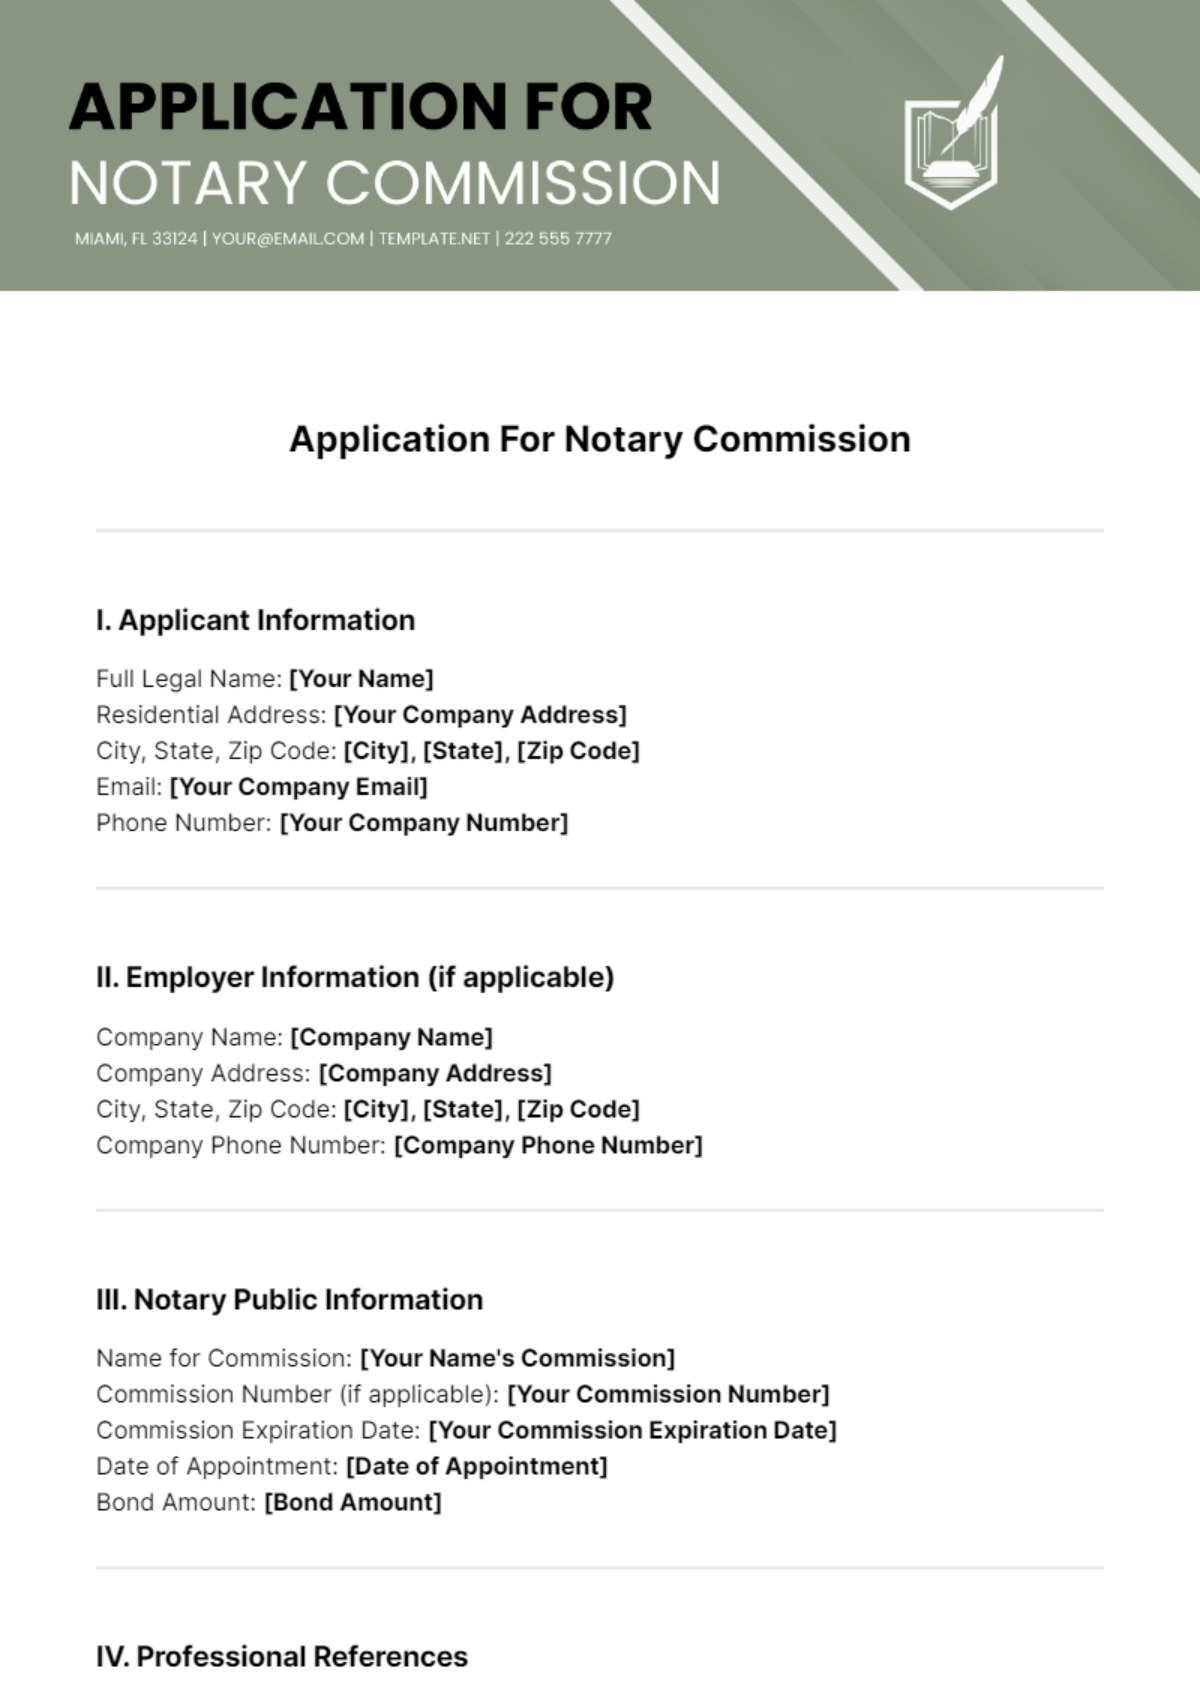 Application For Notary Commission Template